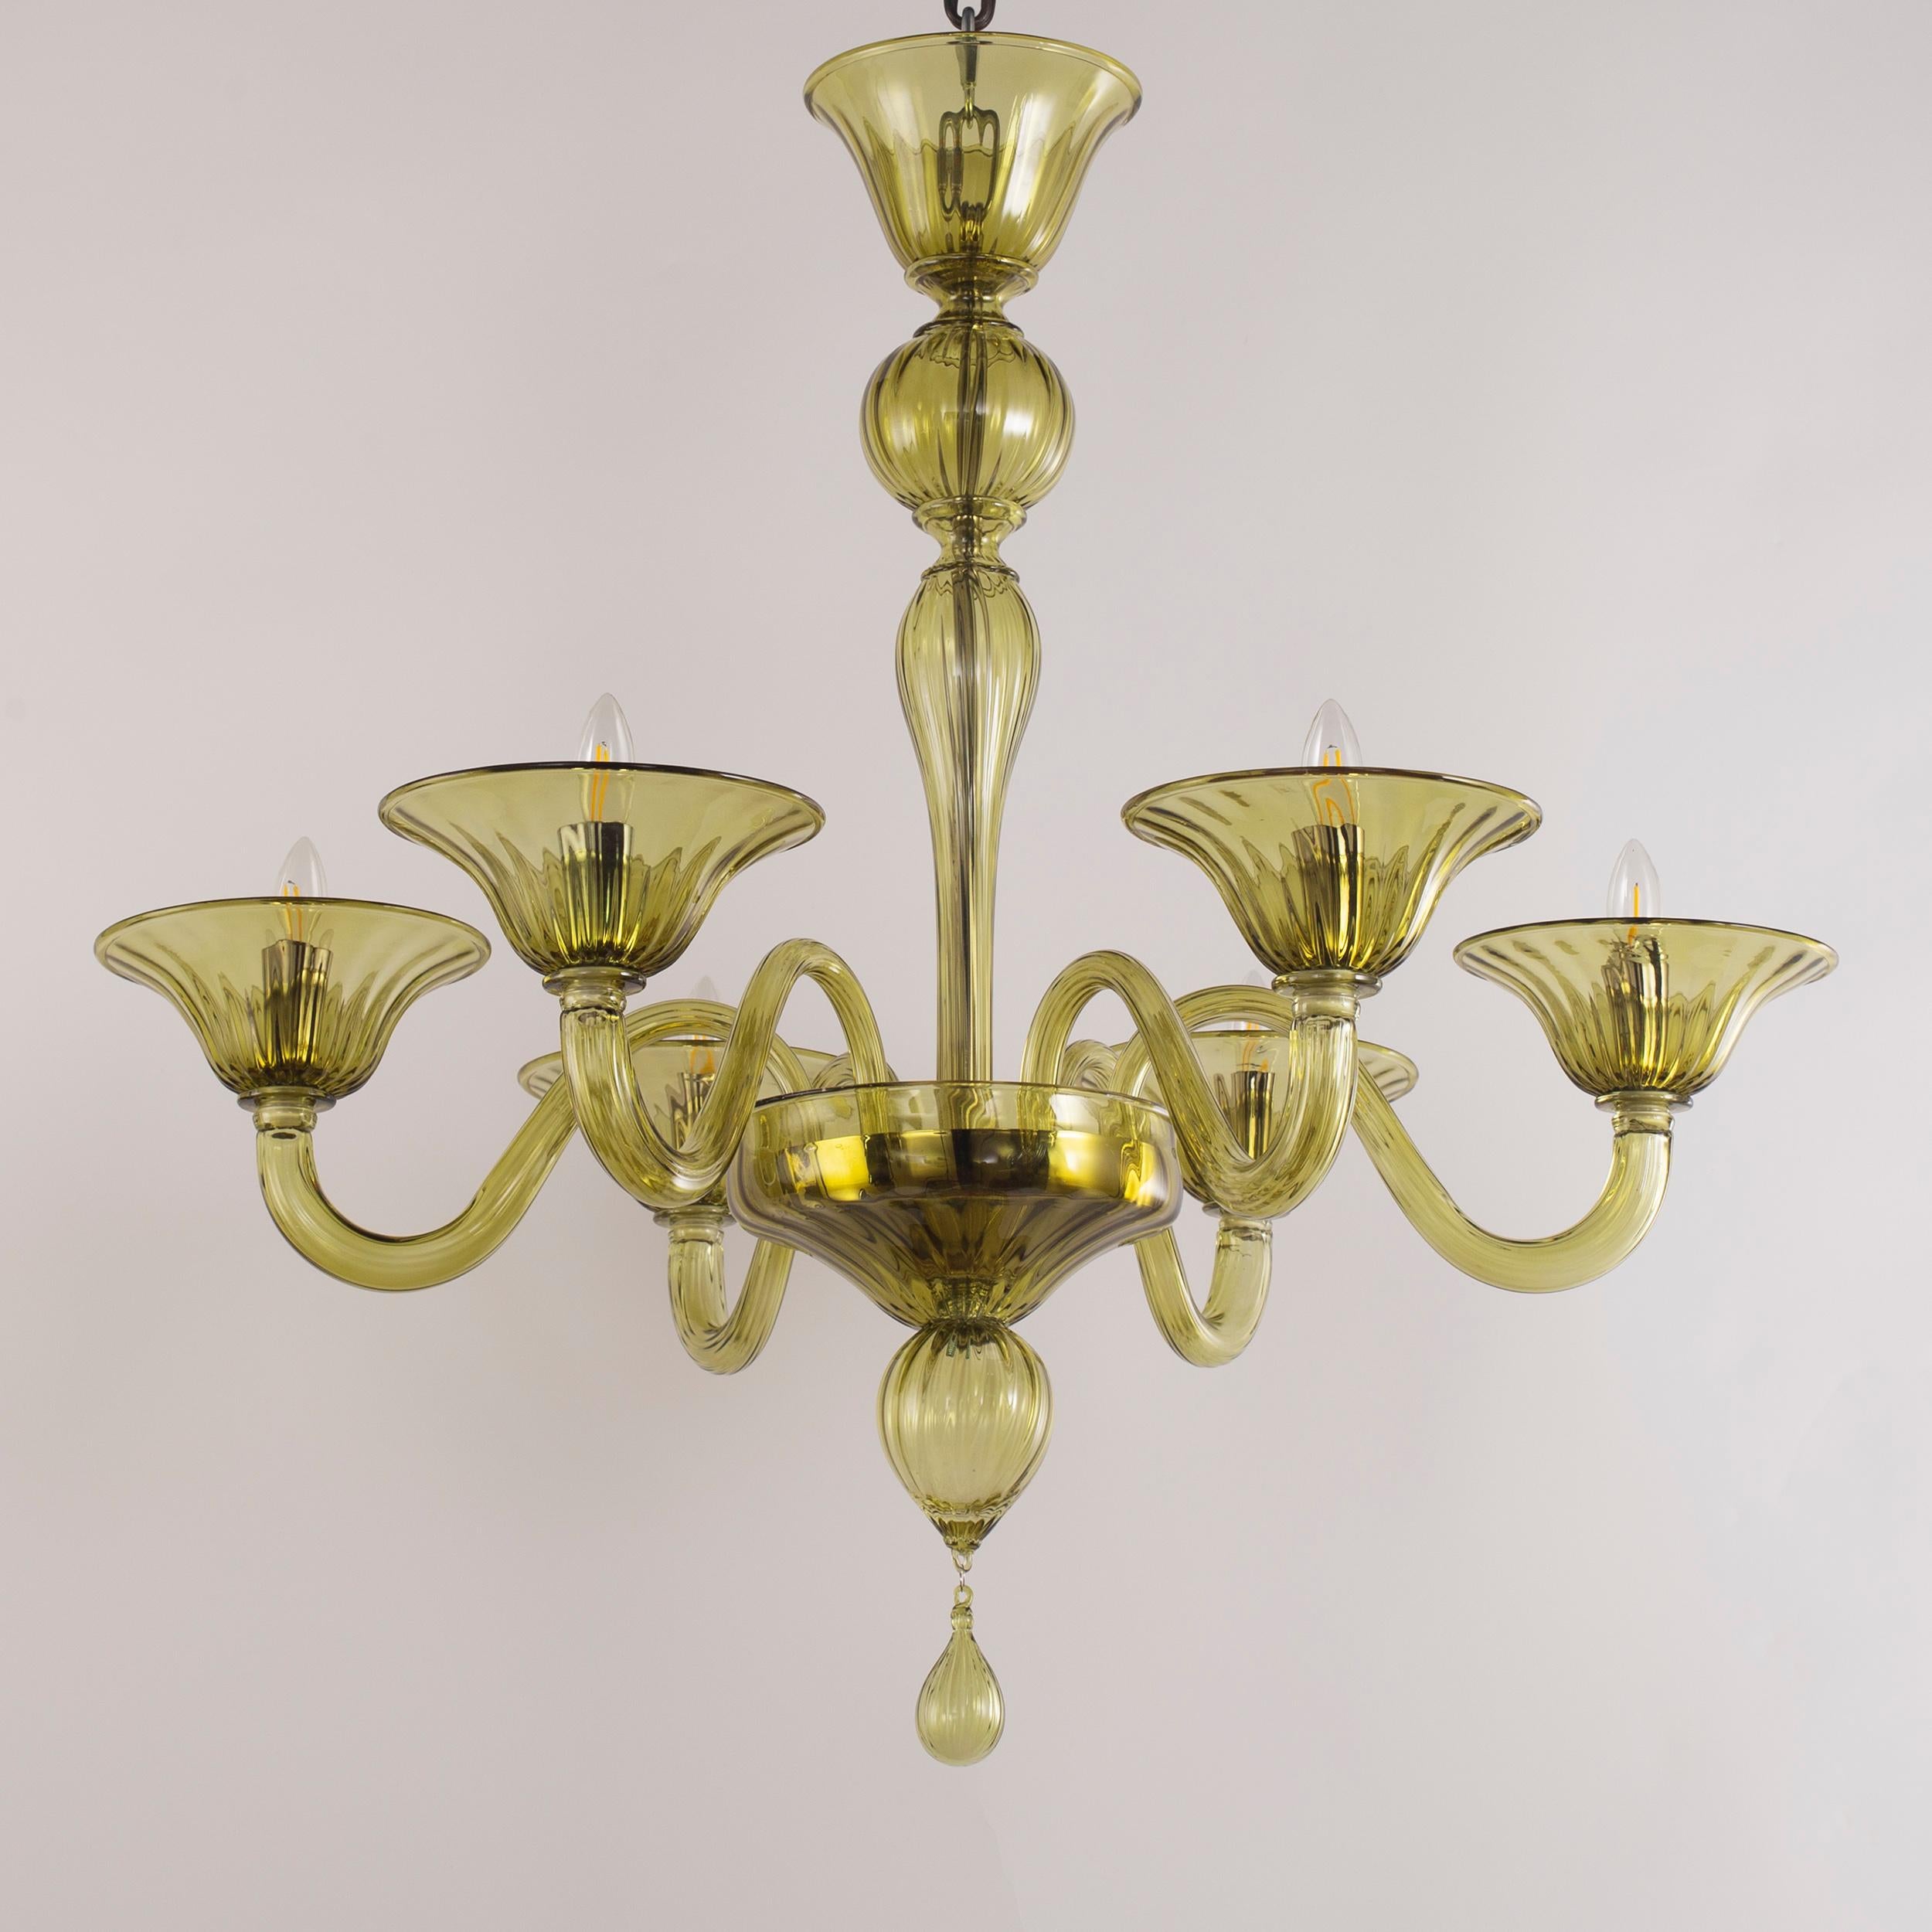 Simplicissimus 360 chandelier, 6 lights, Olive Green artistic glass by Multiforme
This collection in Murano glass is characterized by superb simplicity. It is the result of a research which harks back to the Classic Murano chandeliers with the